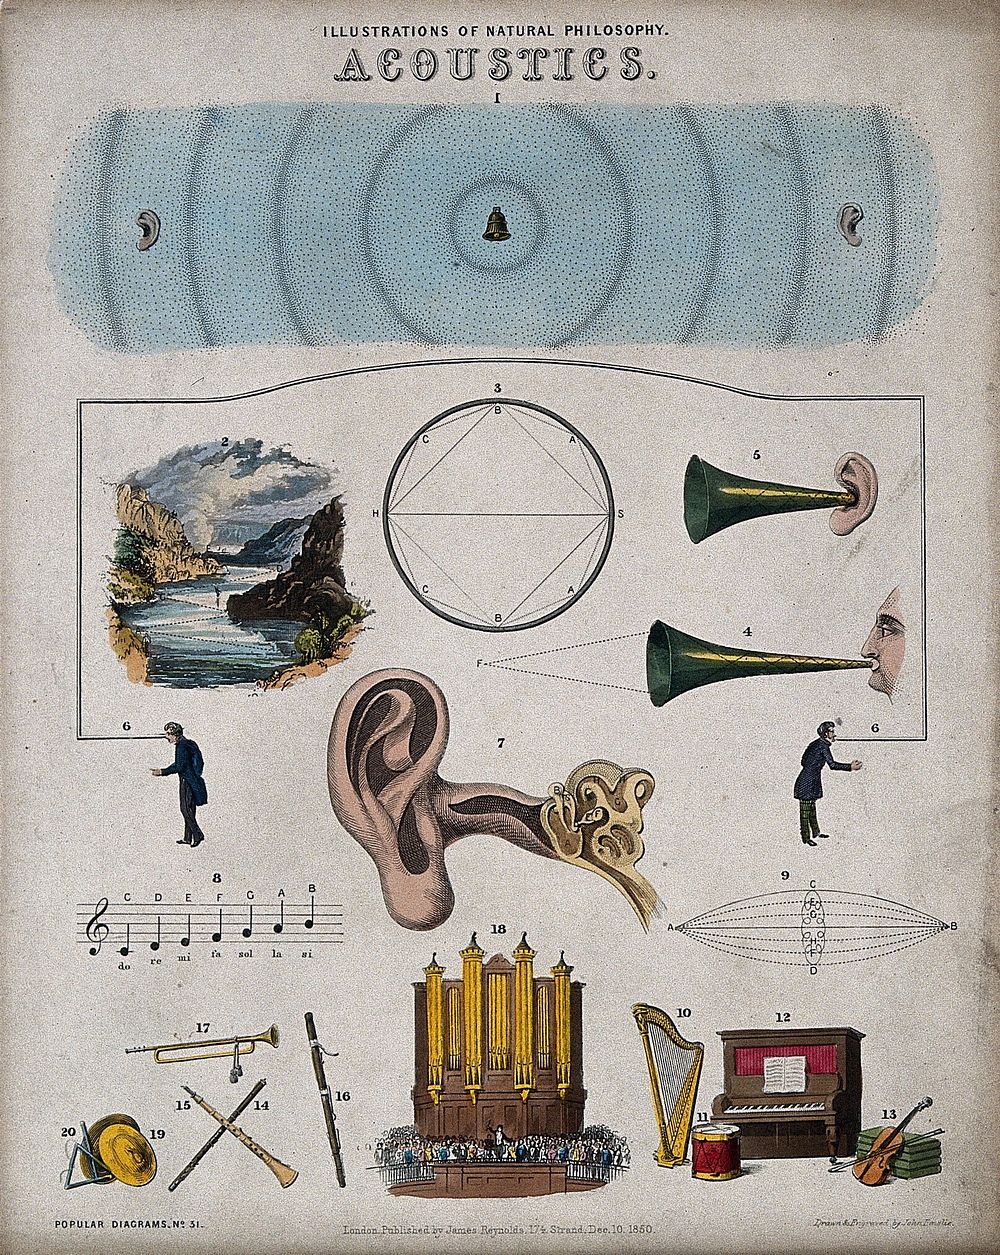 Acoustics: sonic phenomena and musical instruments. Coloured engraving by J. Emslie, 1850, after himself.